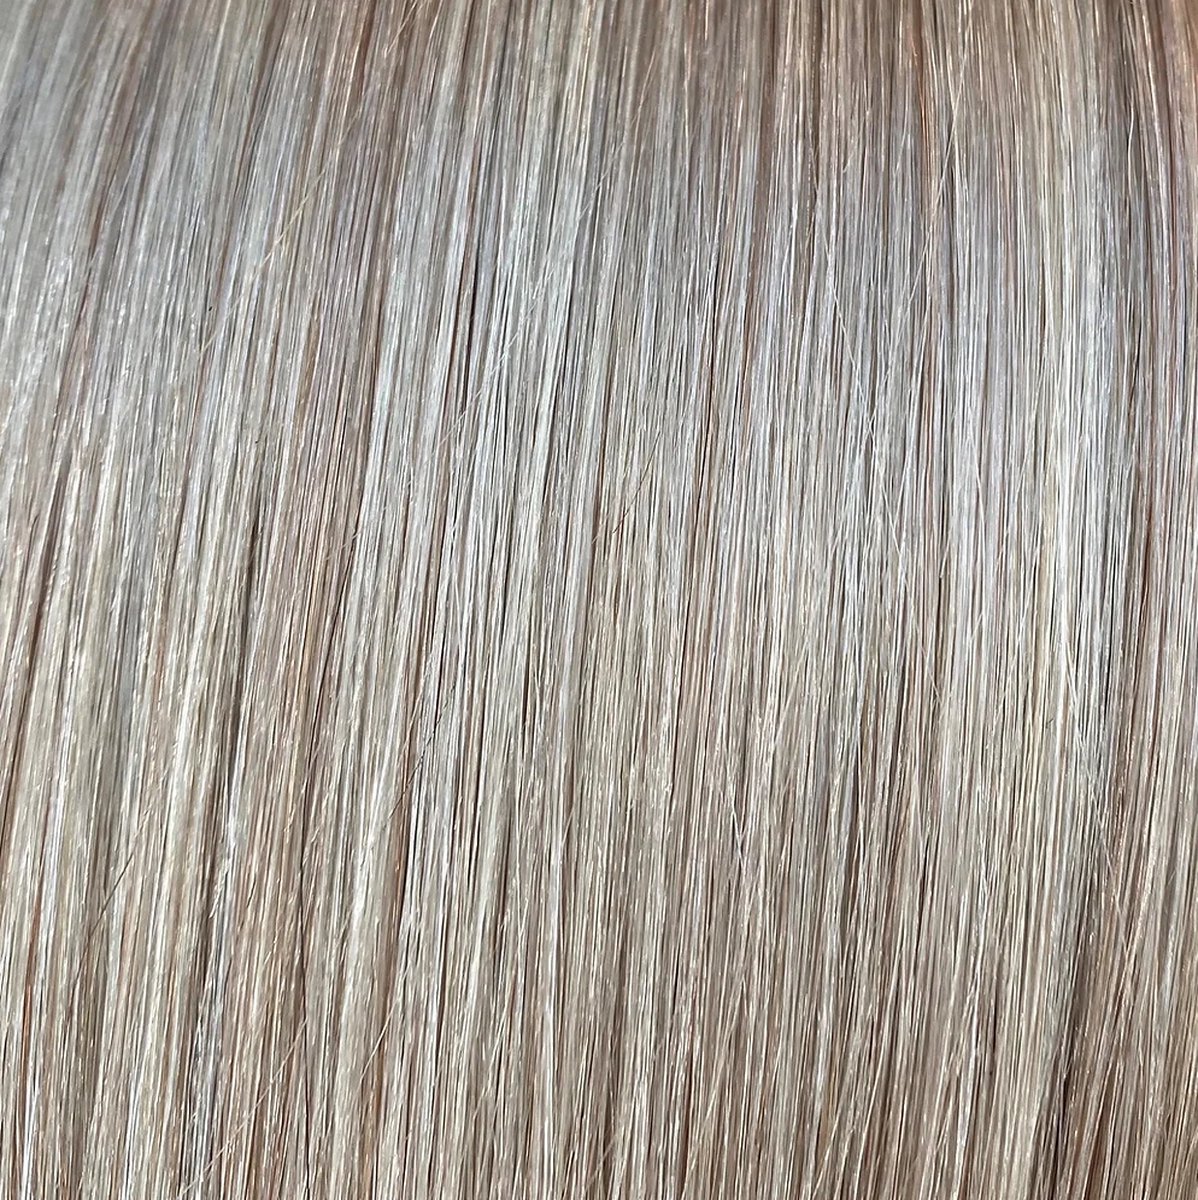 LUXEXTEND Weave Hair Extensions #M18/60 | Human hair | Human Hair Weave | 60 cm - 100 gram | Remy Sorted & Double Drawn | Haarstuk | Extensions Licht Bruin | Weave Haar | Hair Weave Human Hair | Haarverlenging echt haar| Haar